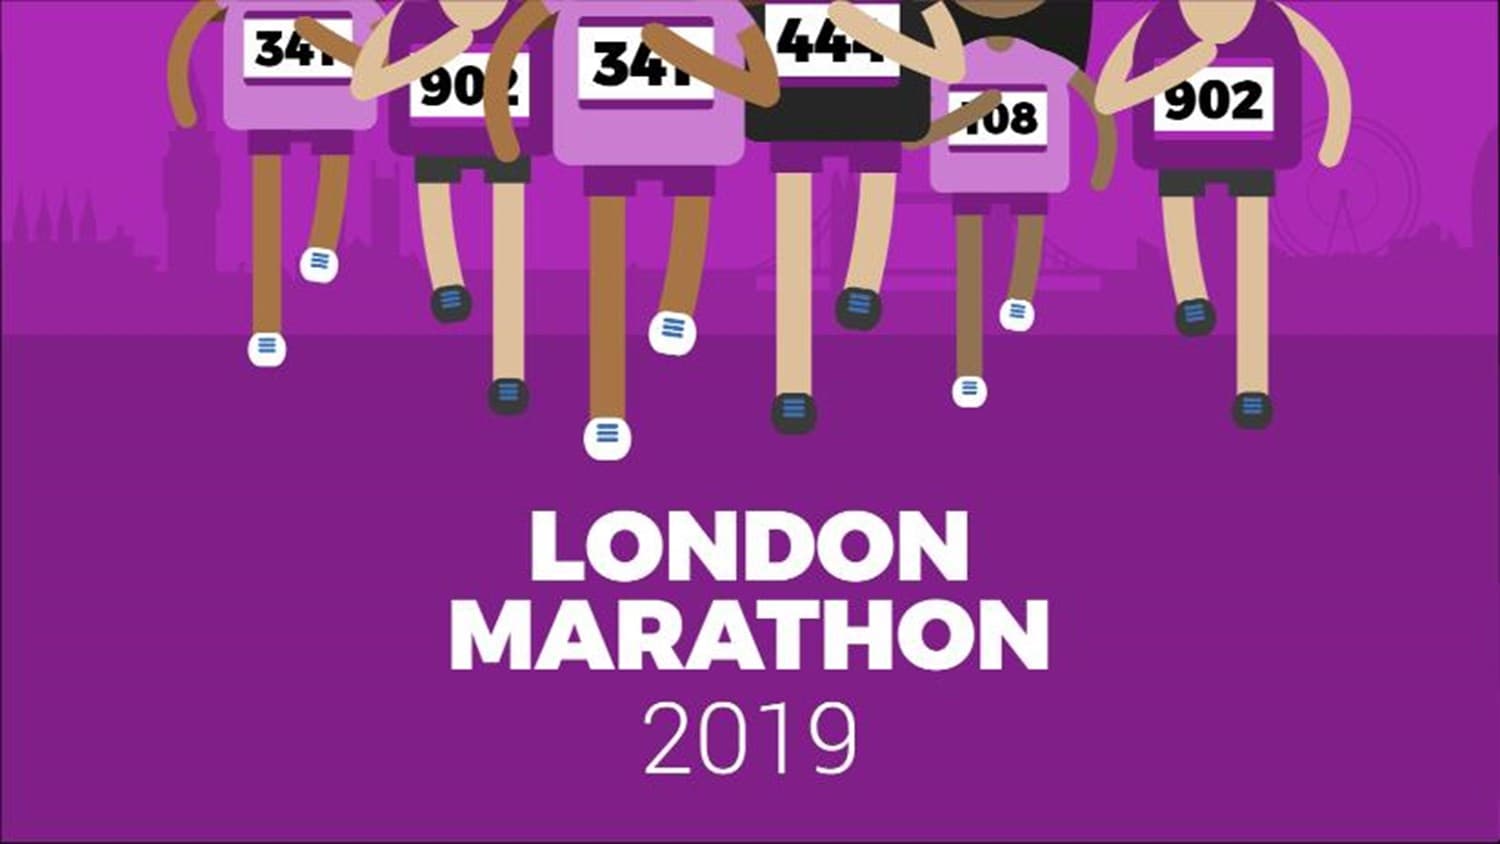 CBHC’s Tom Perry completed the Virgin Money London Marathon 2019